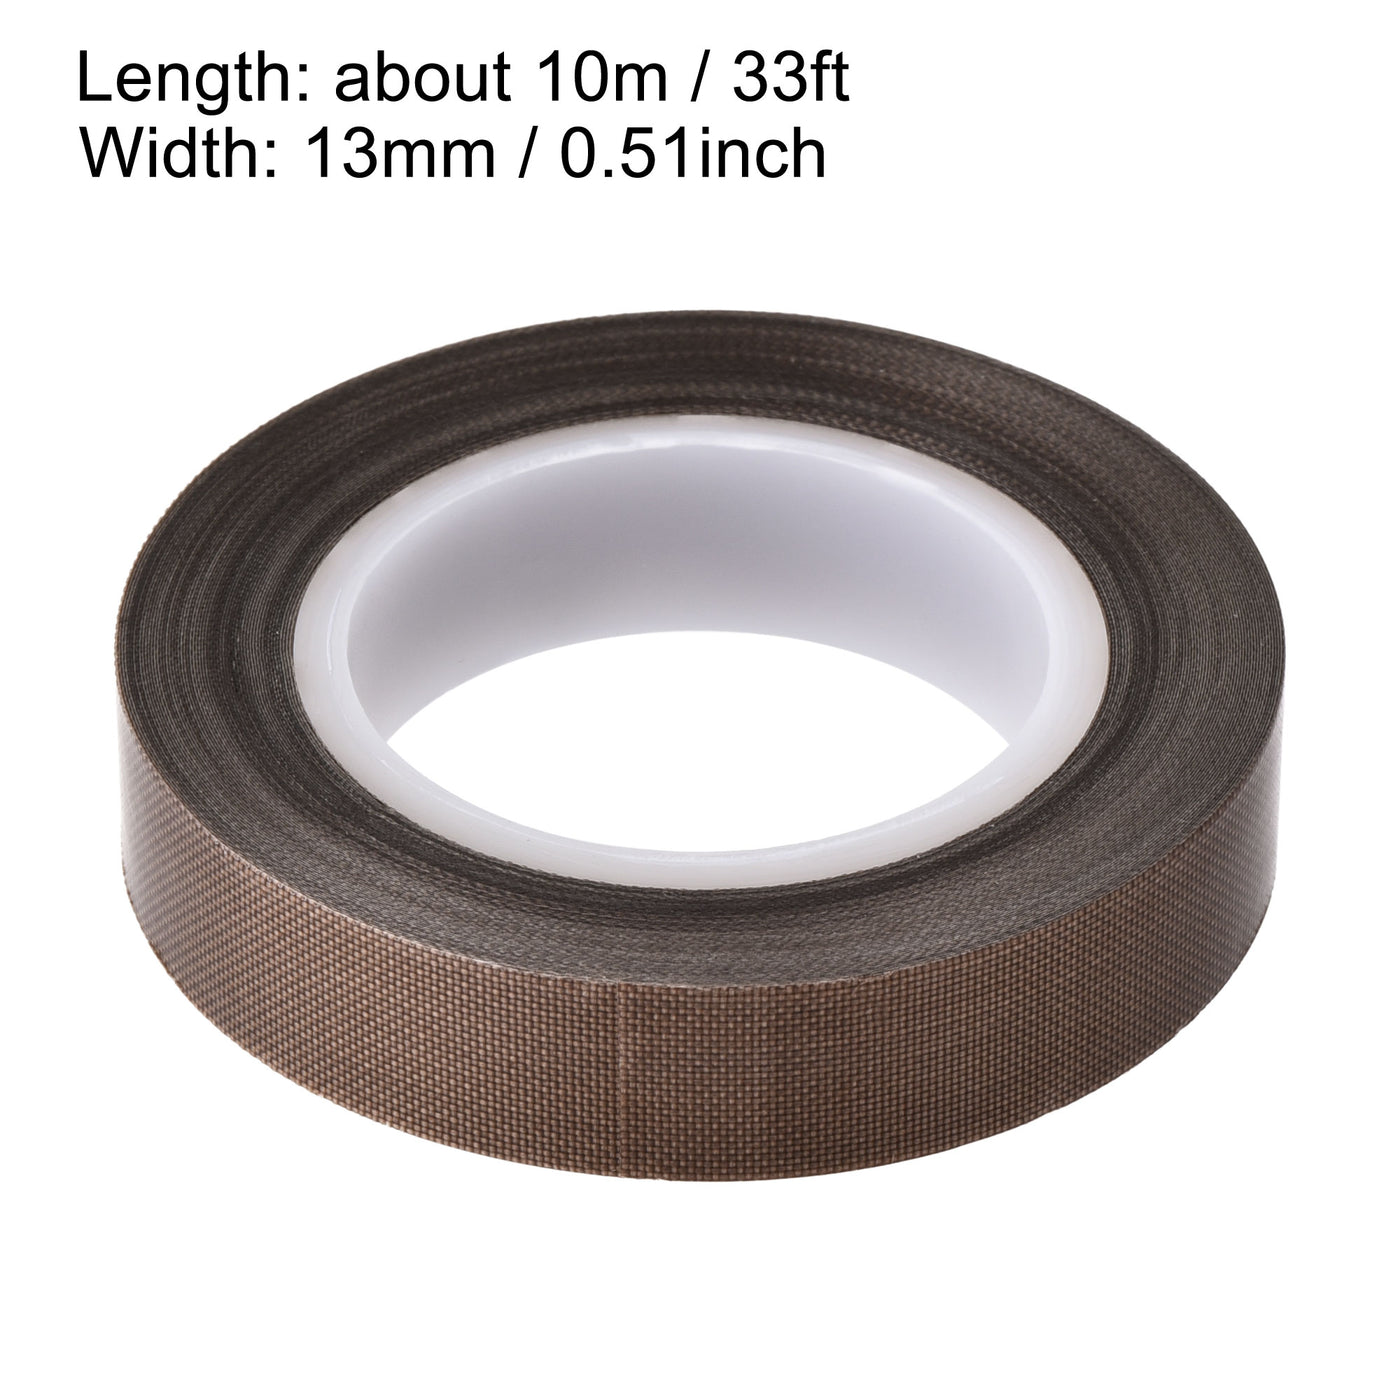 uxcell Uxcell High Temperature Heat Transfer Tape PTFE Film Adhesive Tape 13mm Width 10m 33ft Long Brown